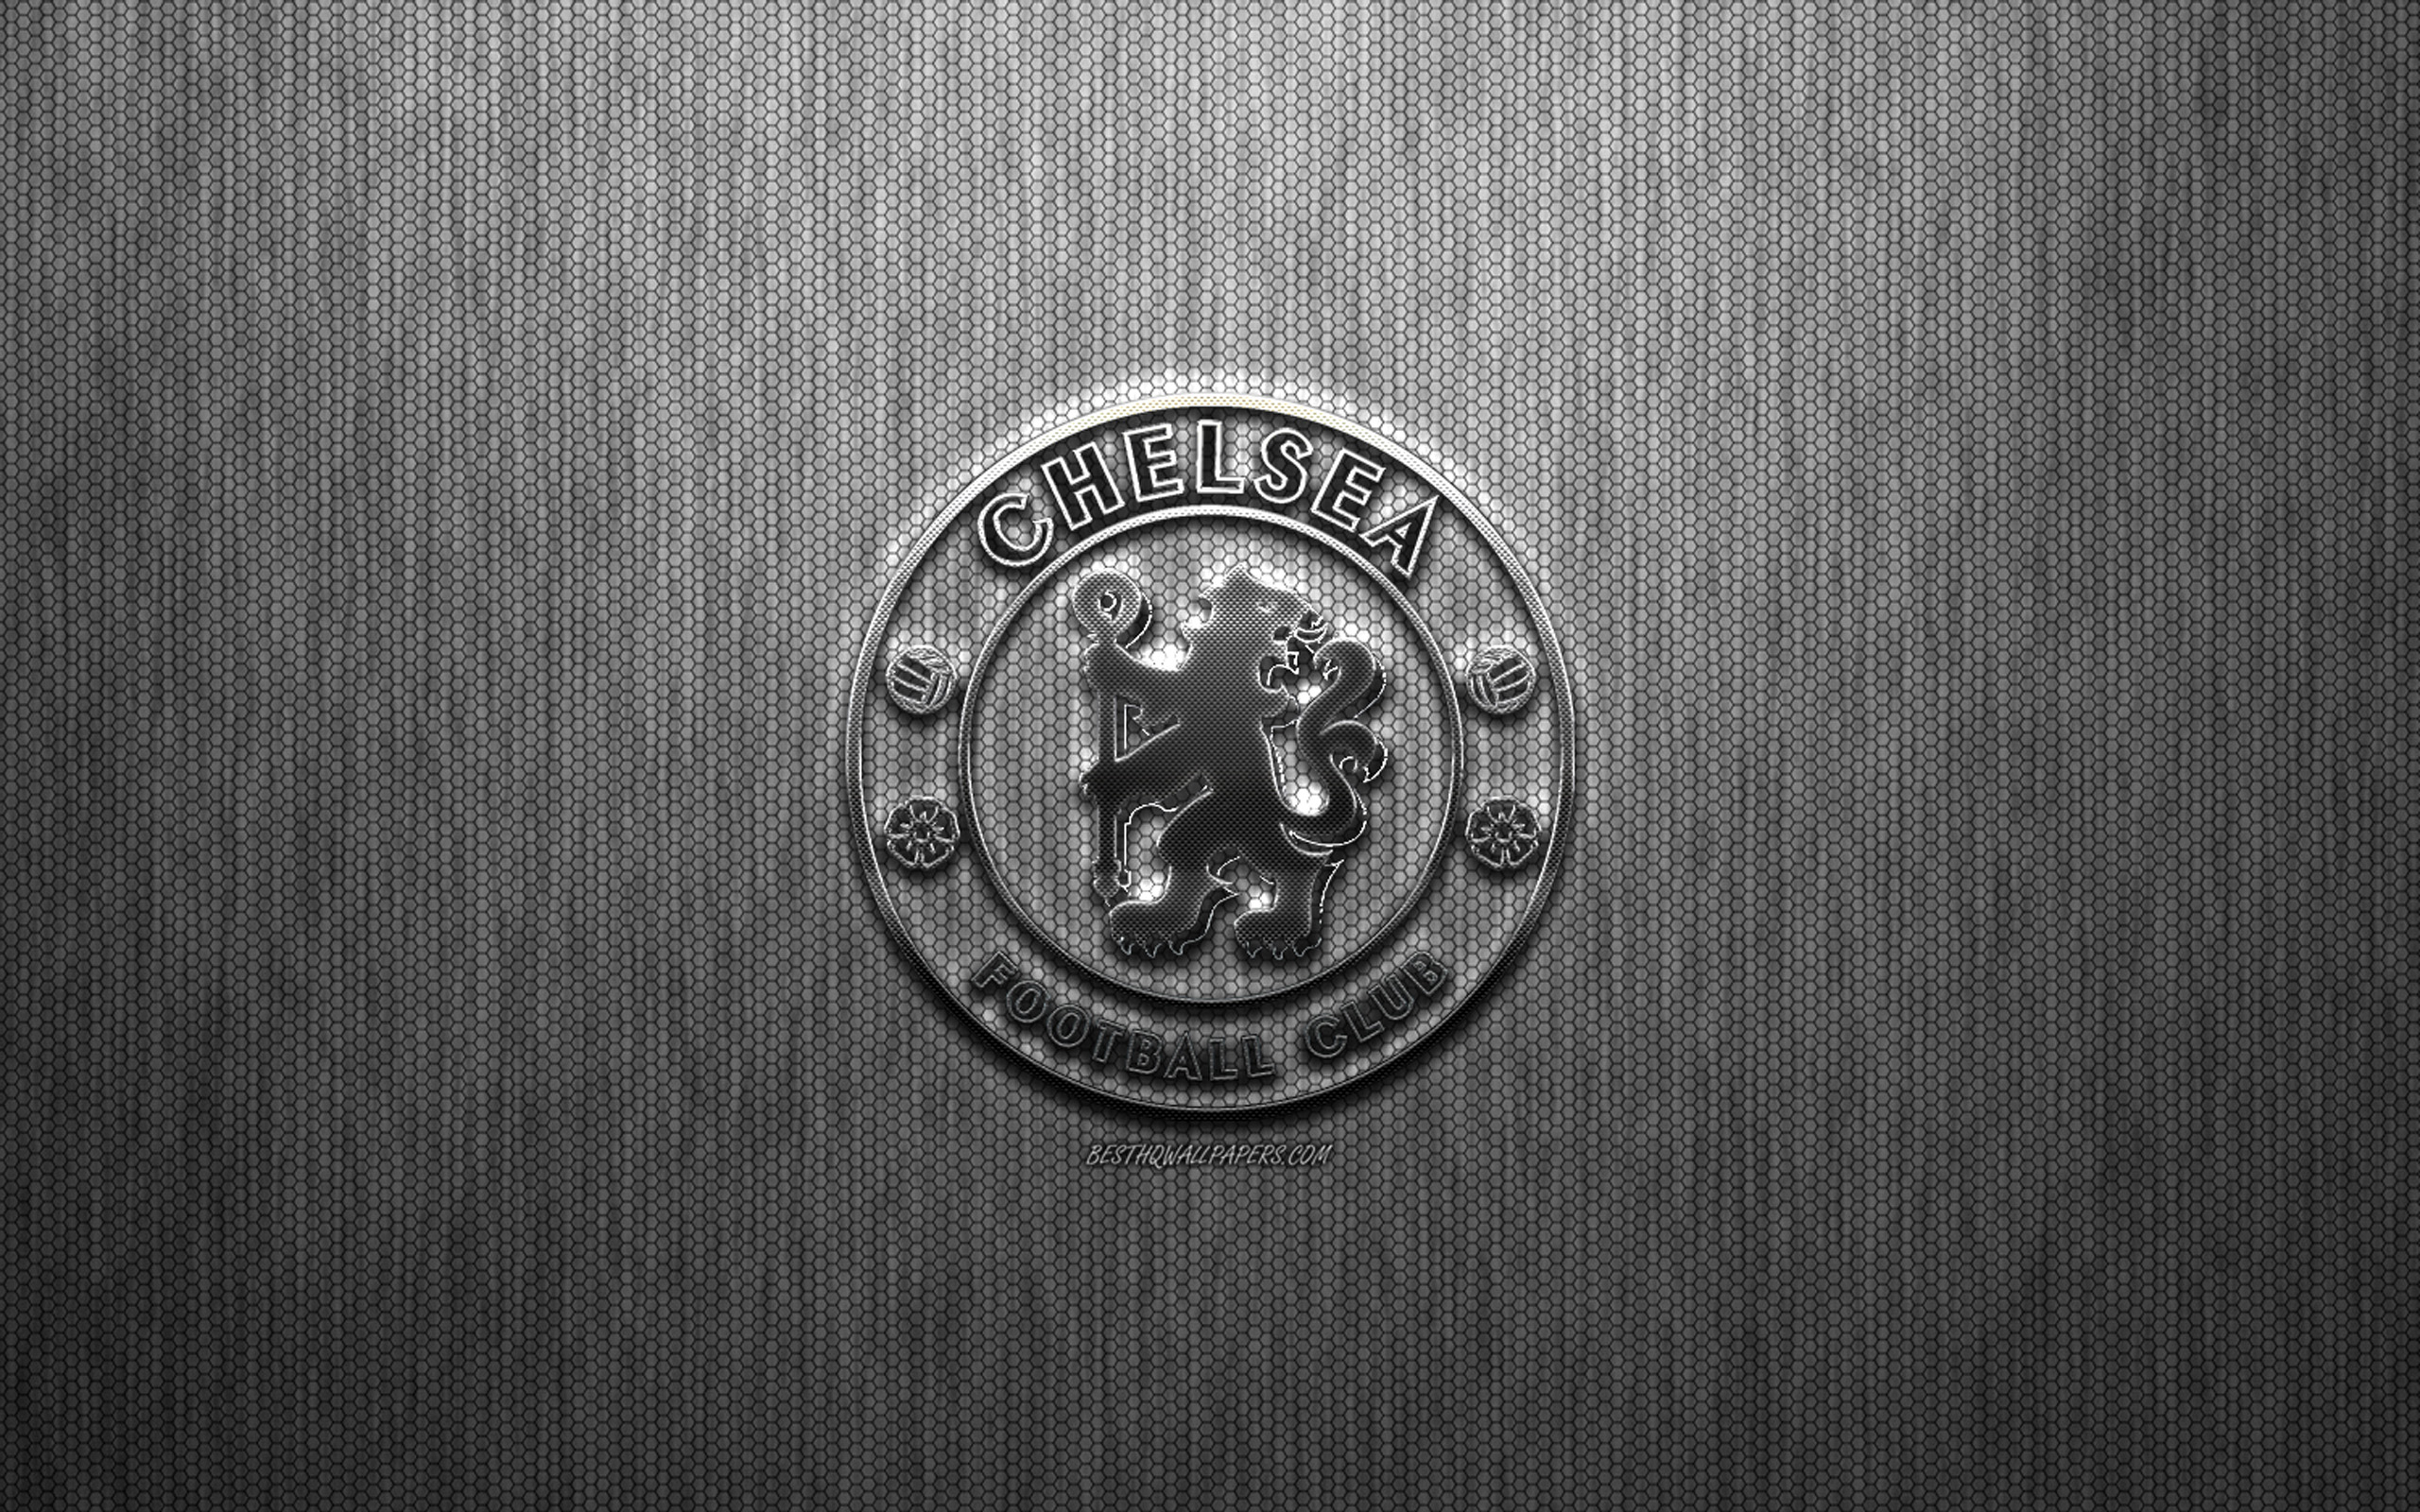 Download wallpaper Chelsea FC, English football club, steel logo, emblem, gray metal background, London, England, Premier League, football for desktop with resolution 2560x1600. High Quality HD picture wallpaper